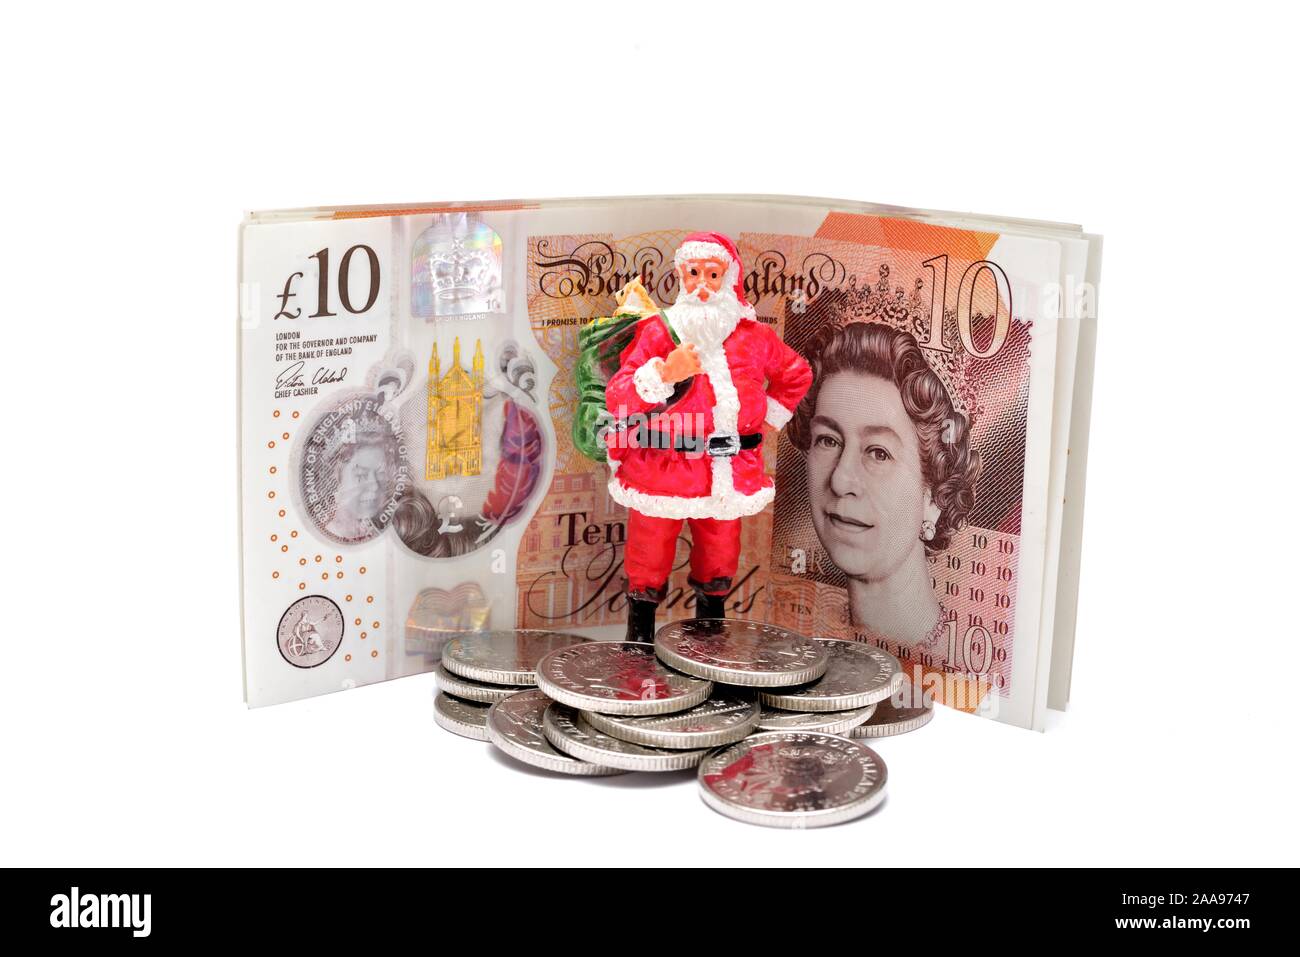 A santa claus figurine standing in front of some new ten pound notes.England UK Stock Photo